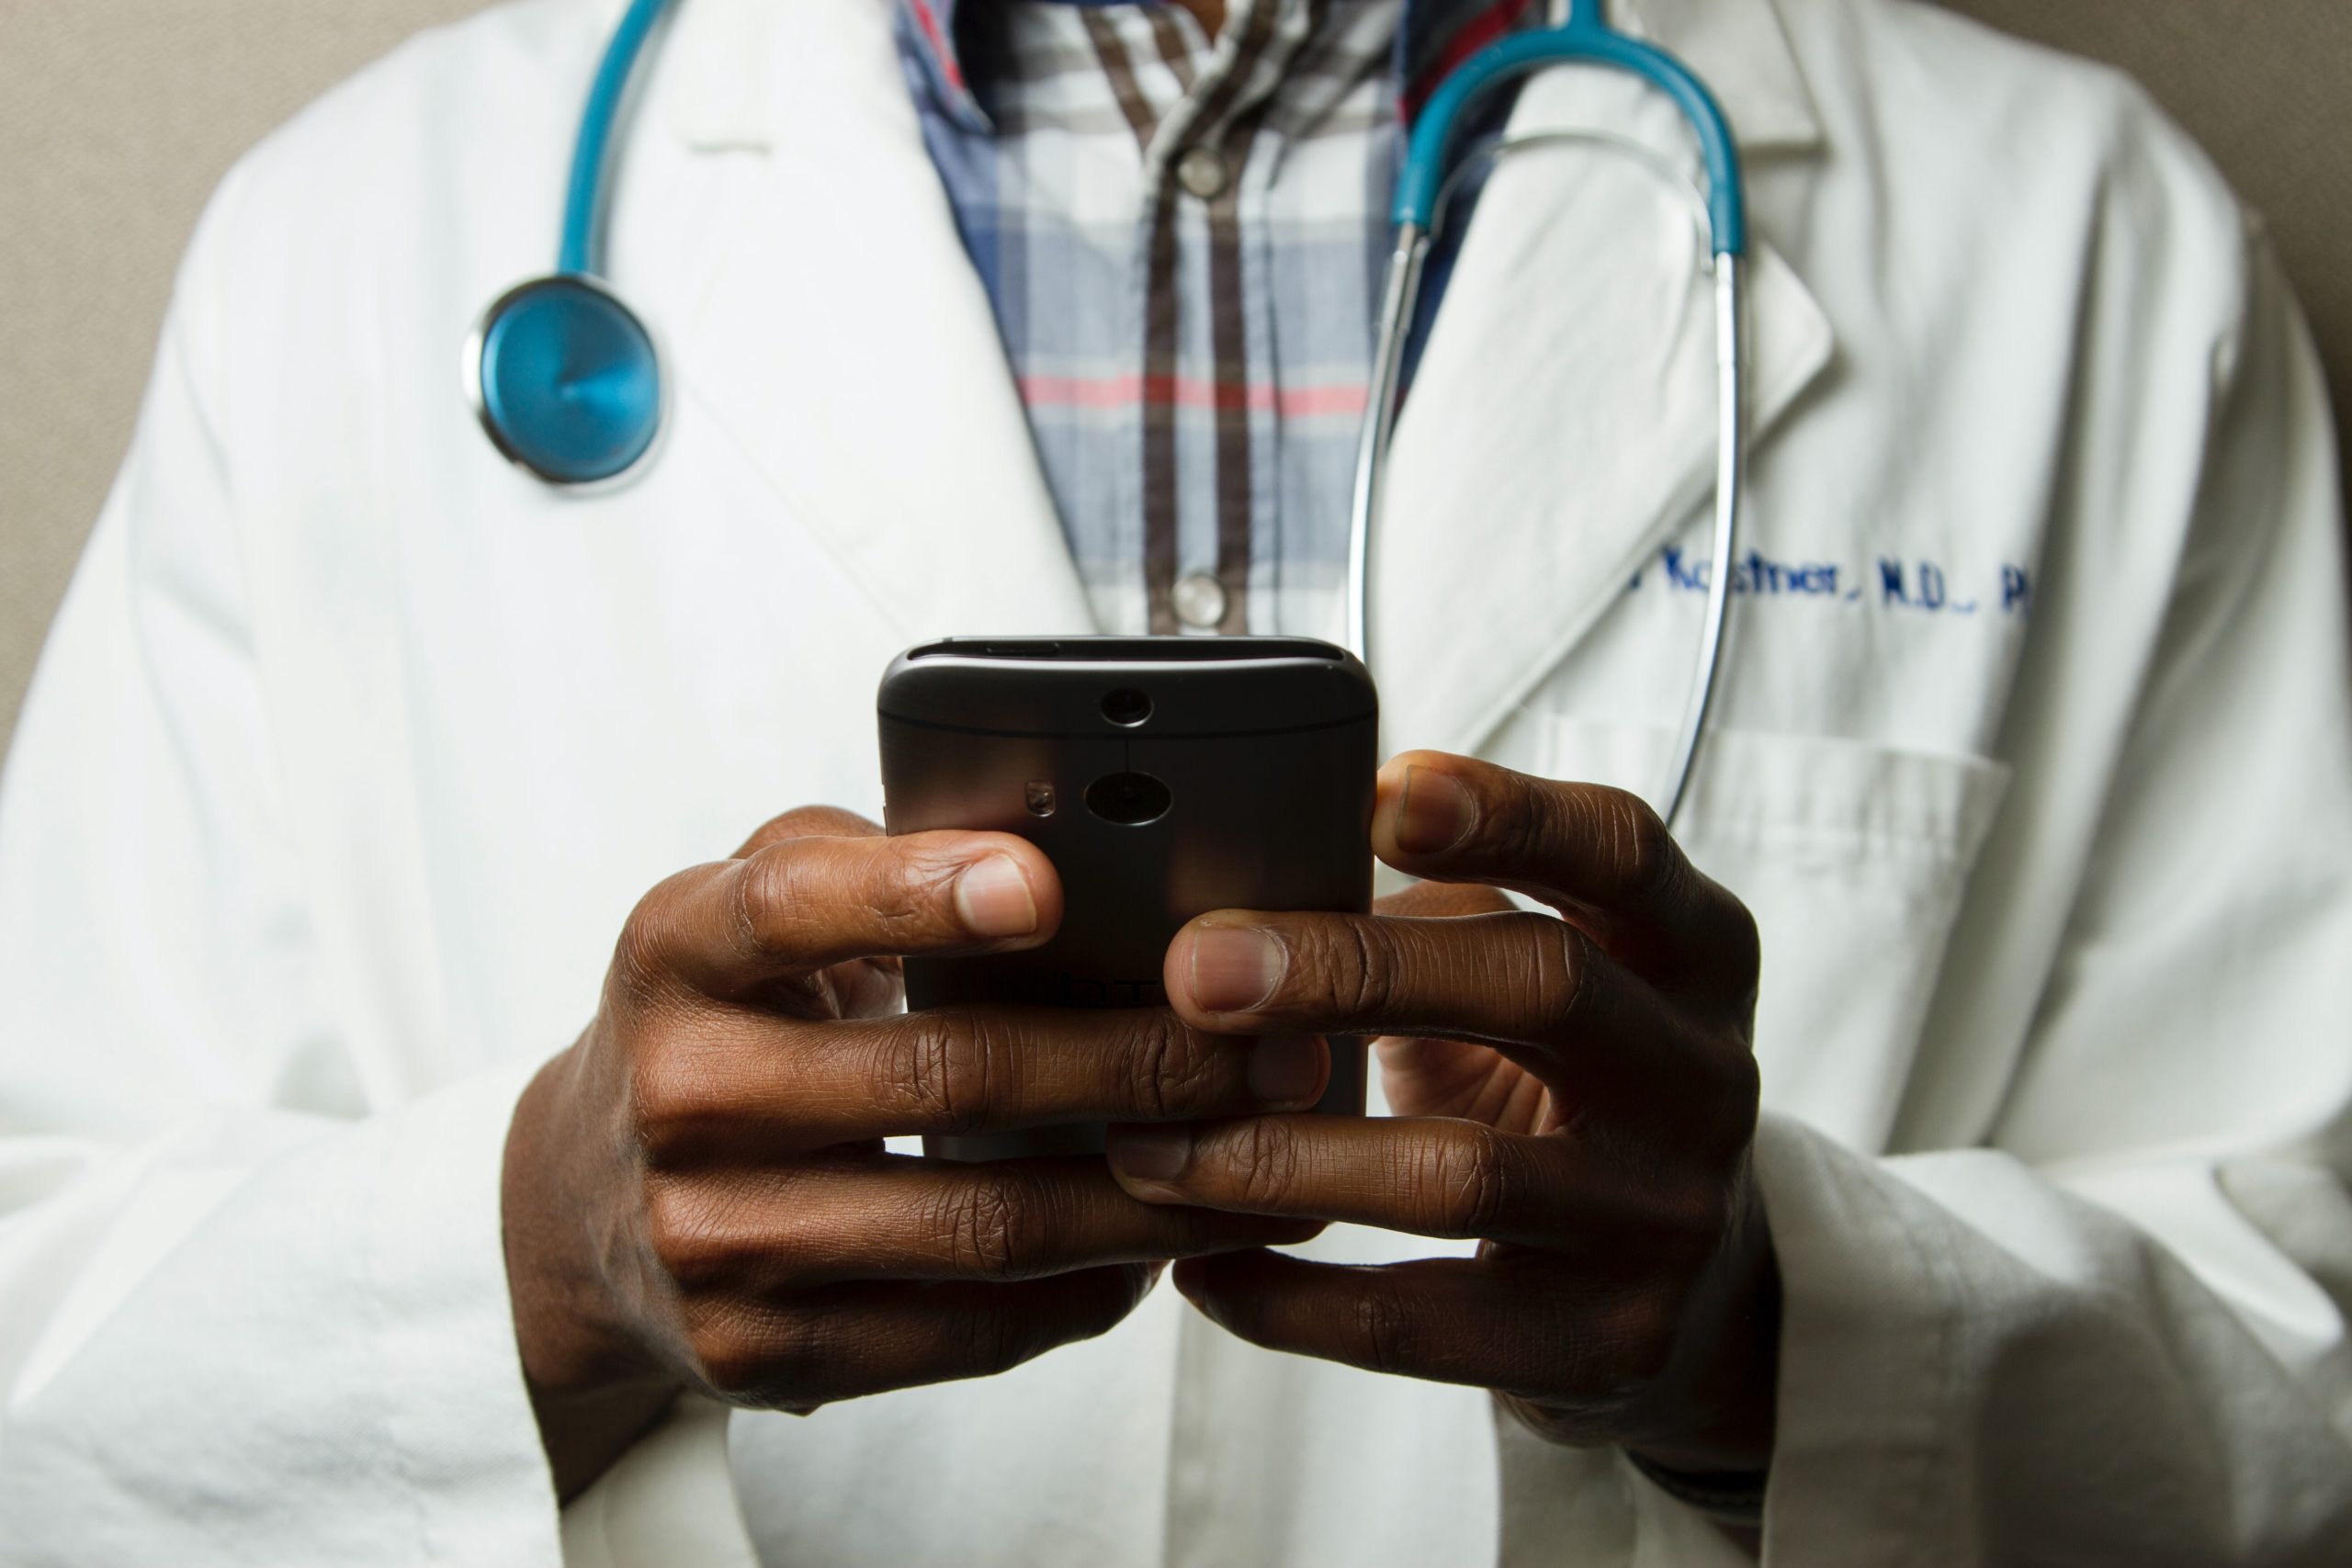 Male doctor wearing a white coat and a stethoscope around his neck holding a smartphone in his hands.